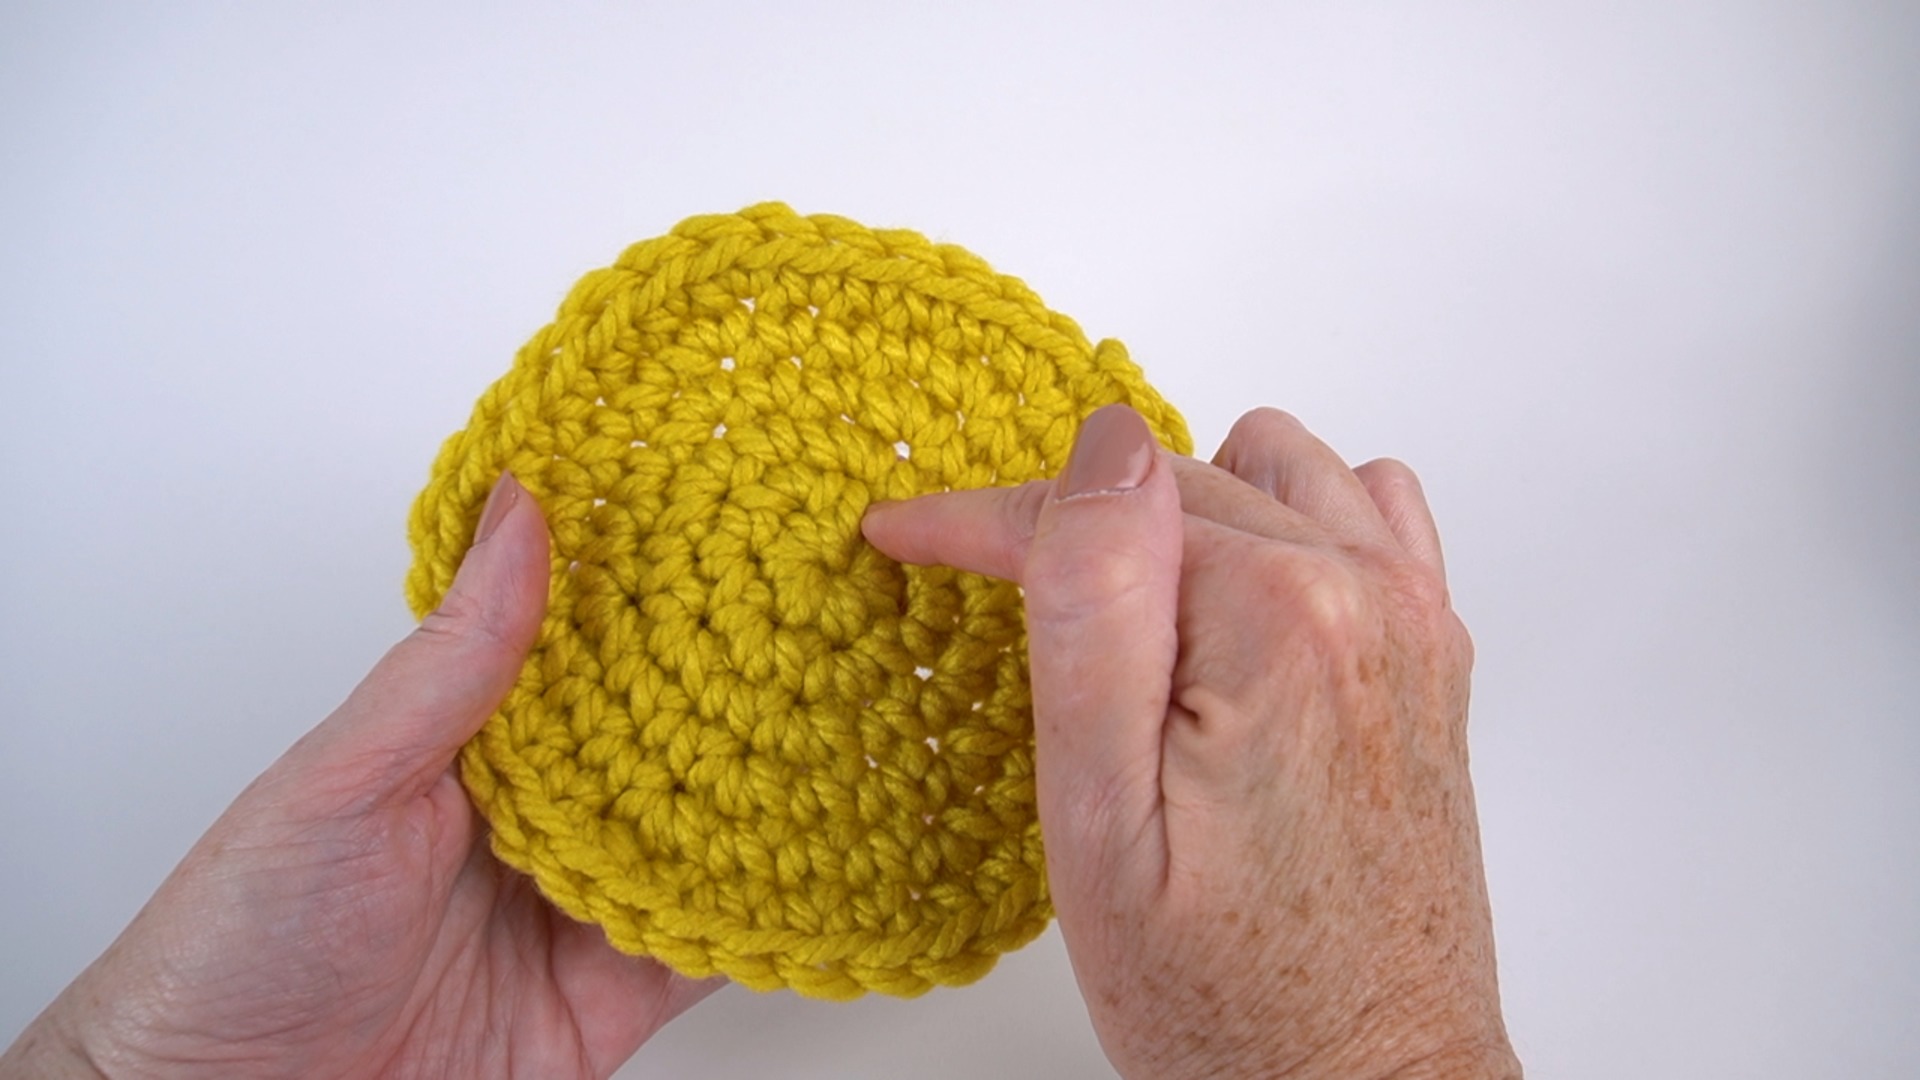 How to: Crochet a Perfect Circle